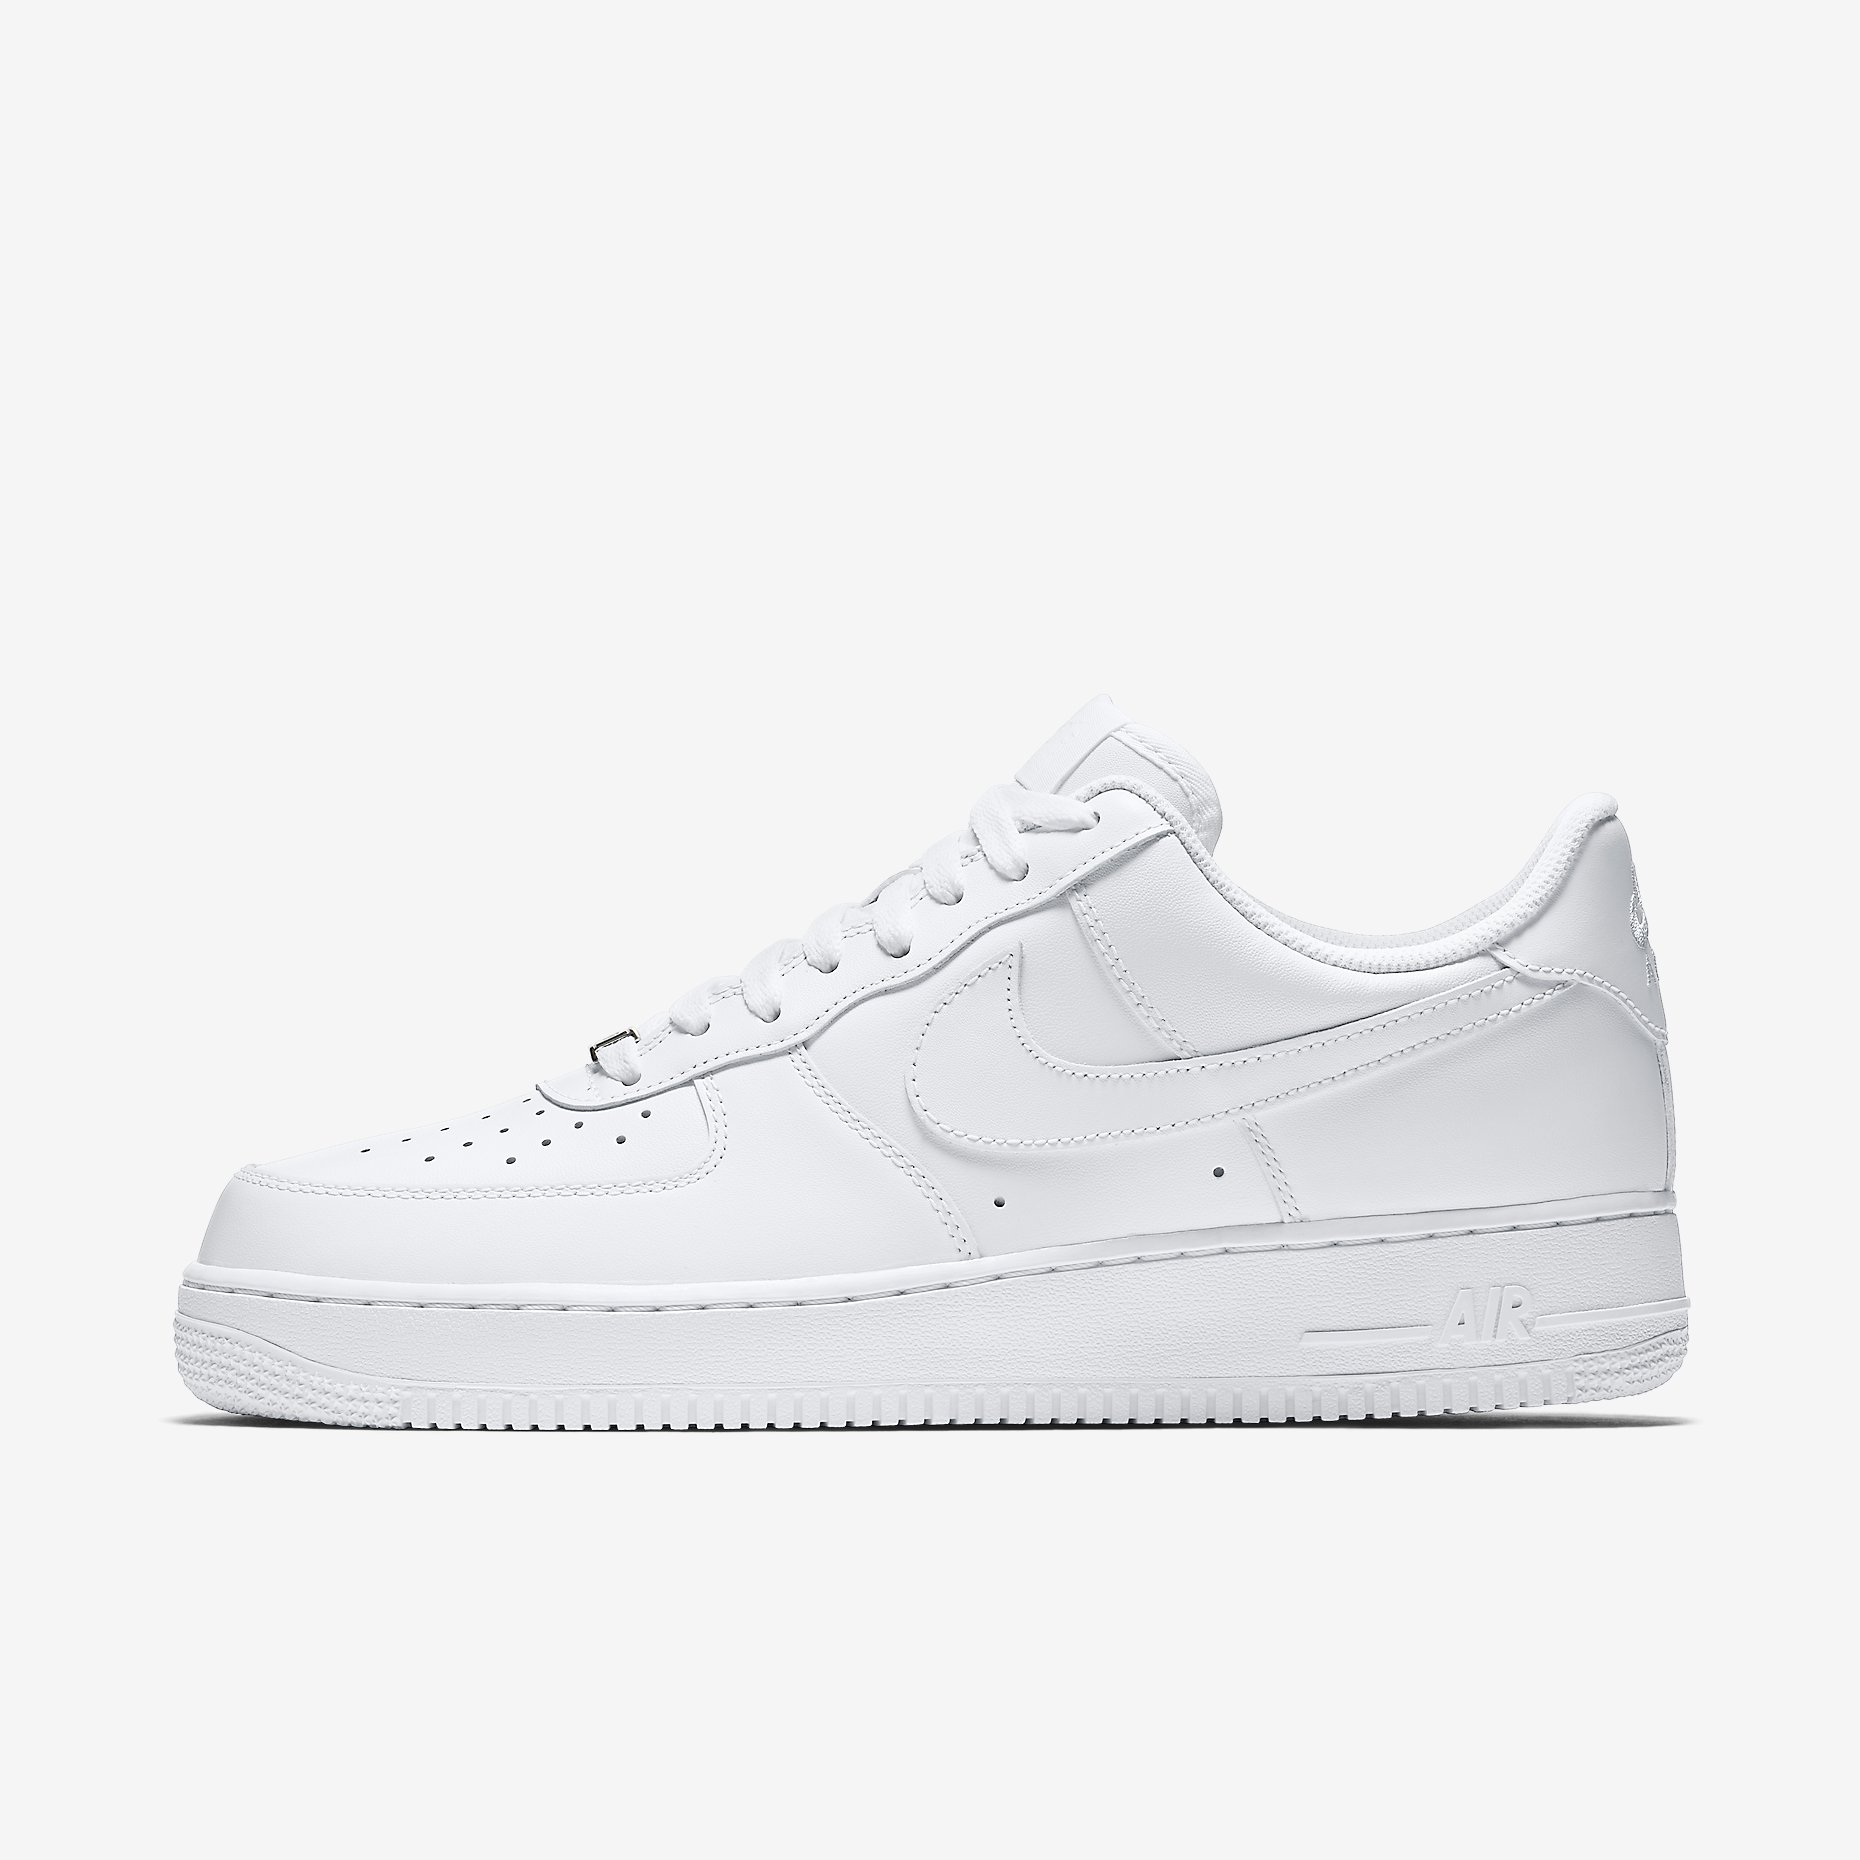 nike-air-force-1-low-white-2